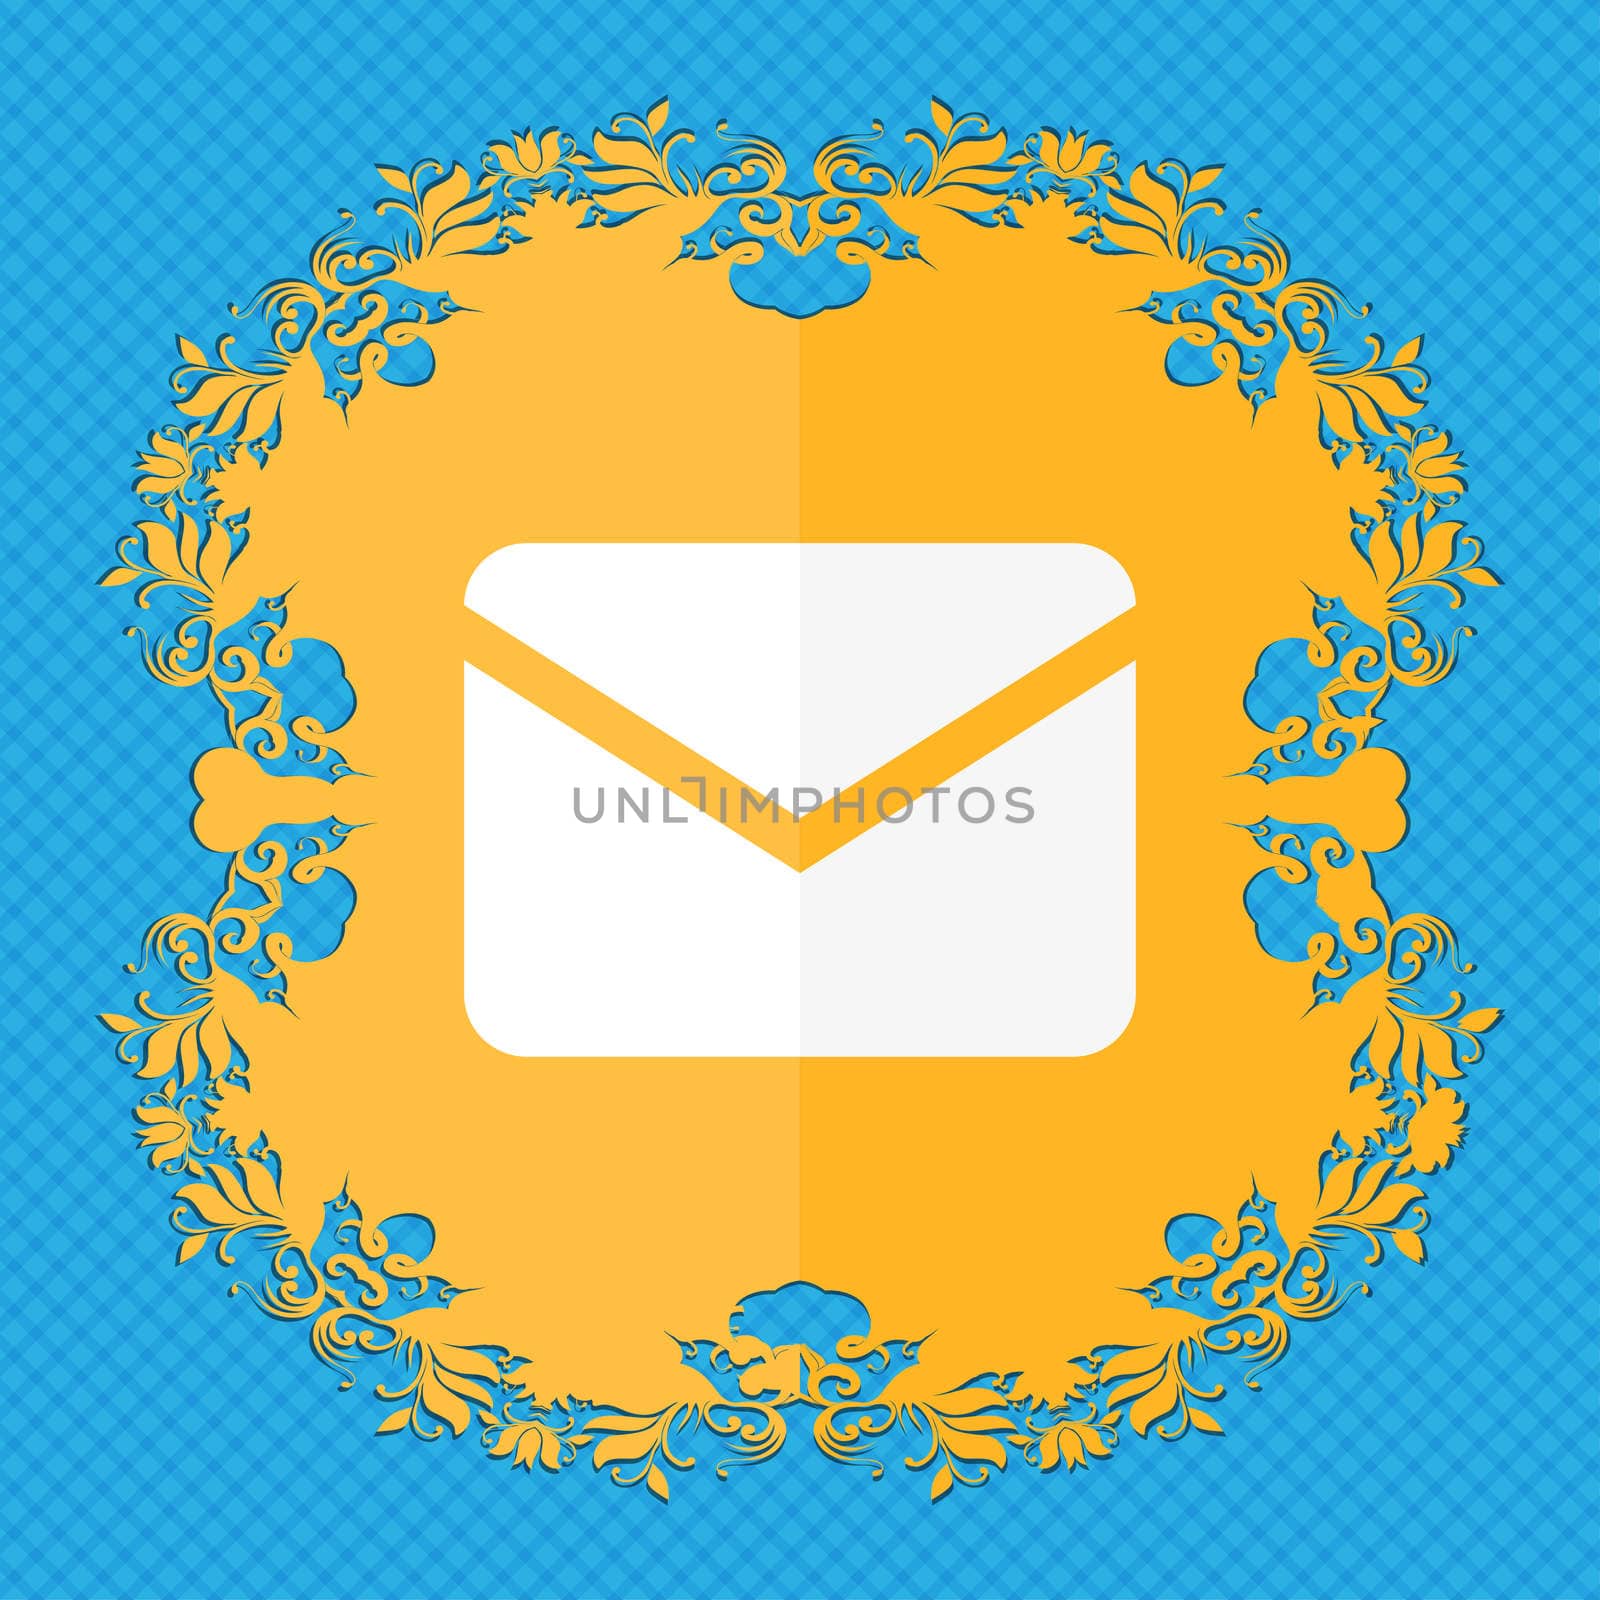 Mail, Envelope, Message . Floral flat design on a blue abstract background with place for your text. illustration